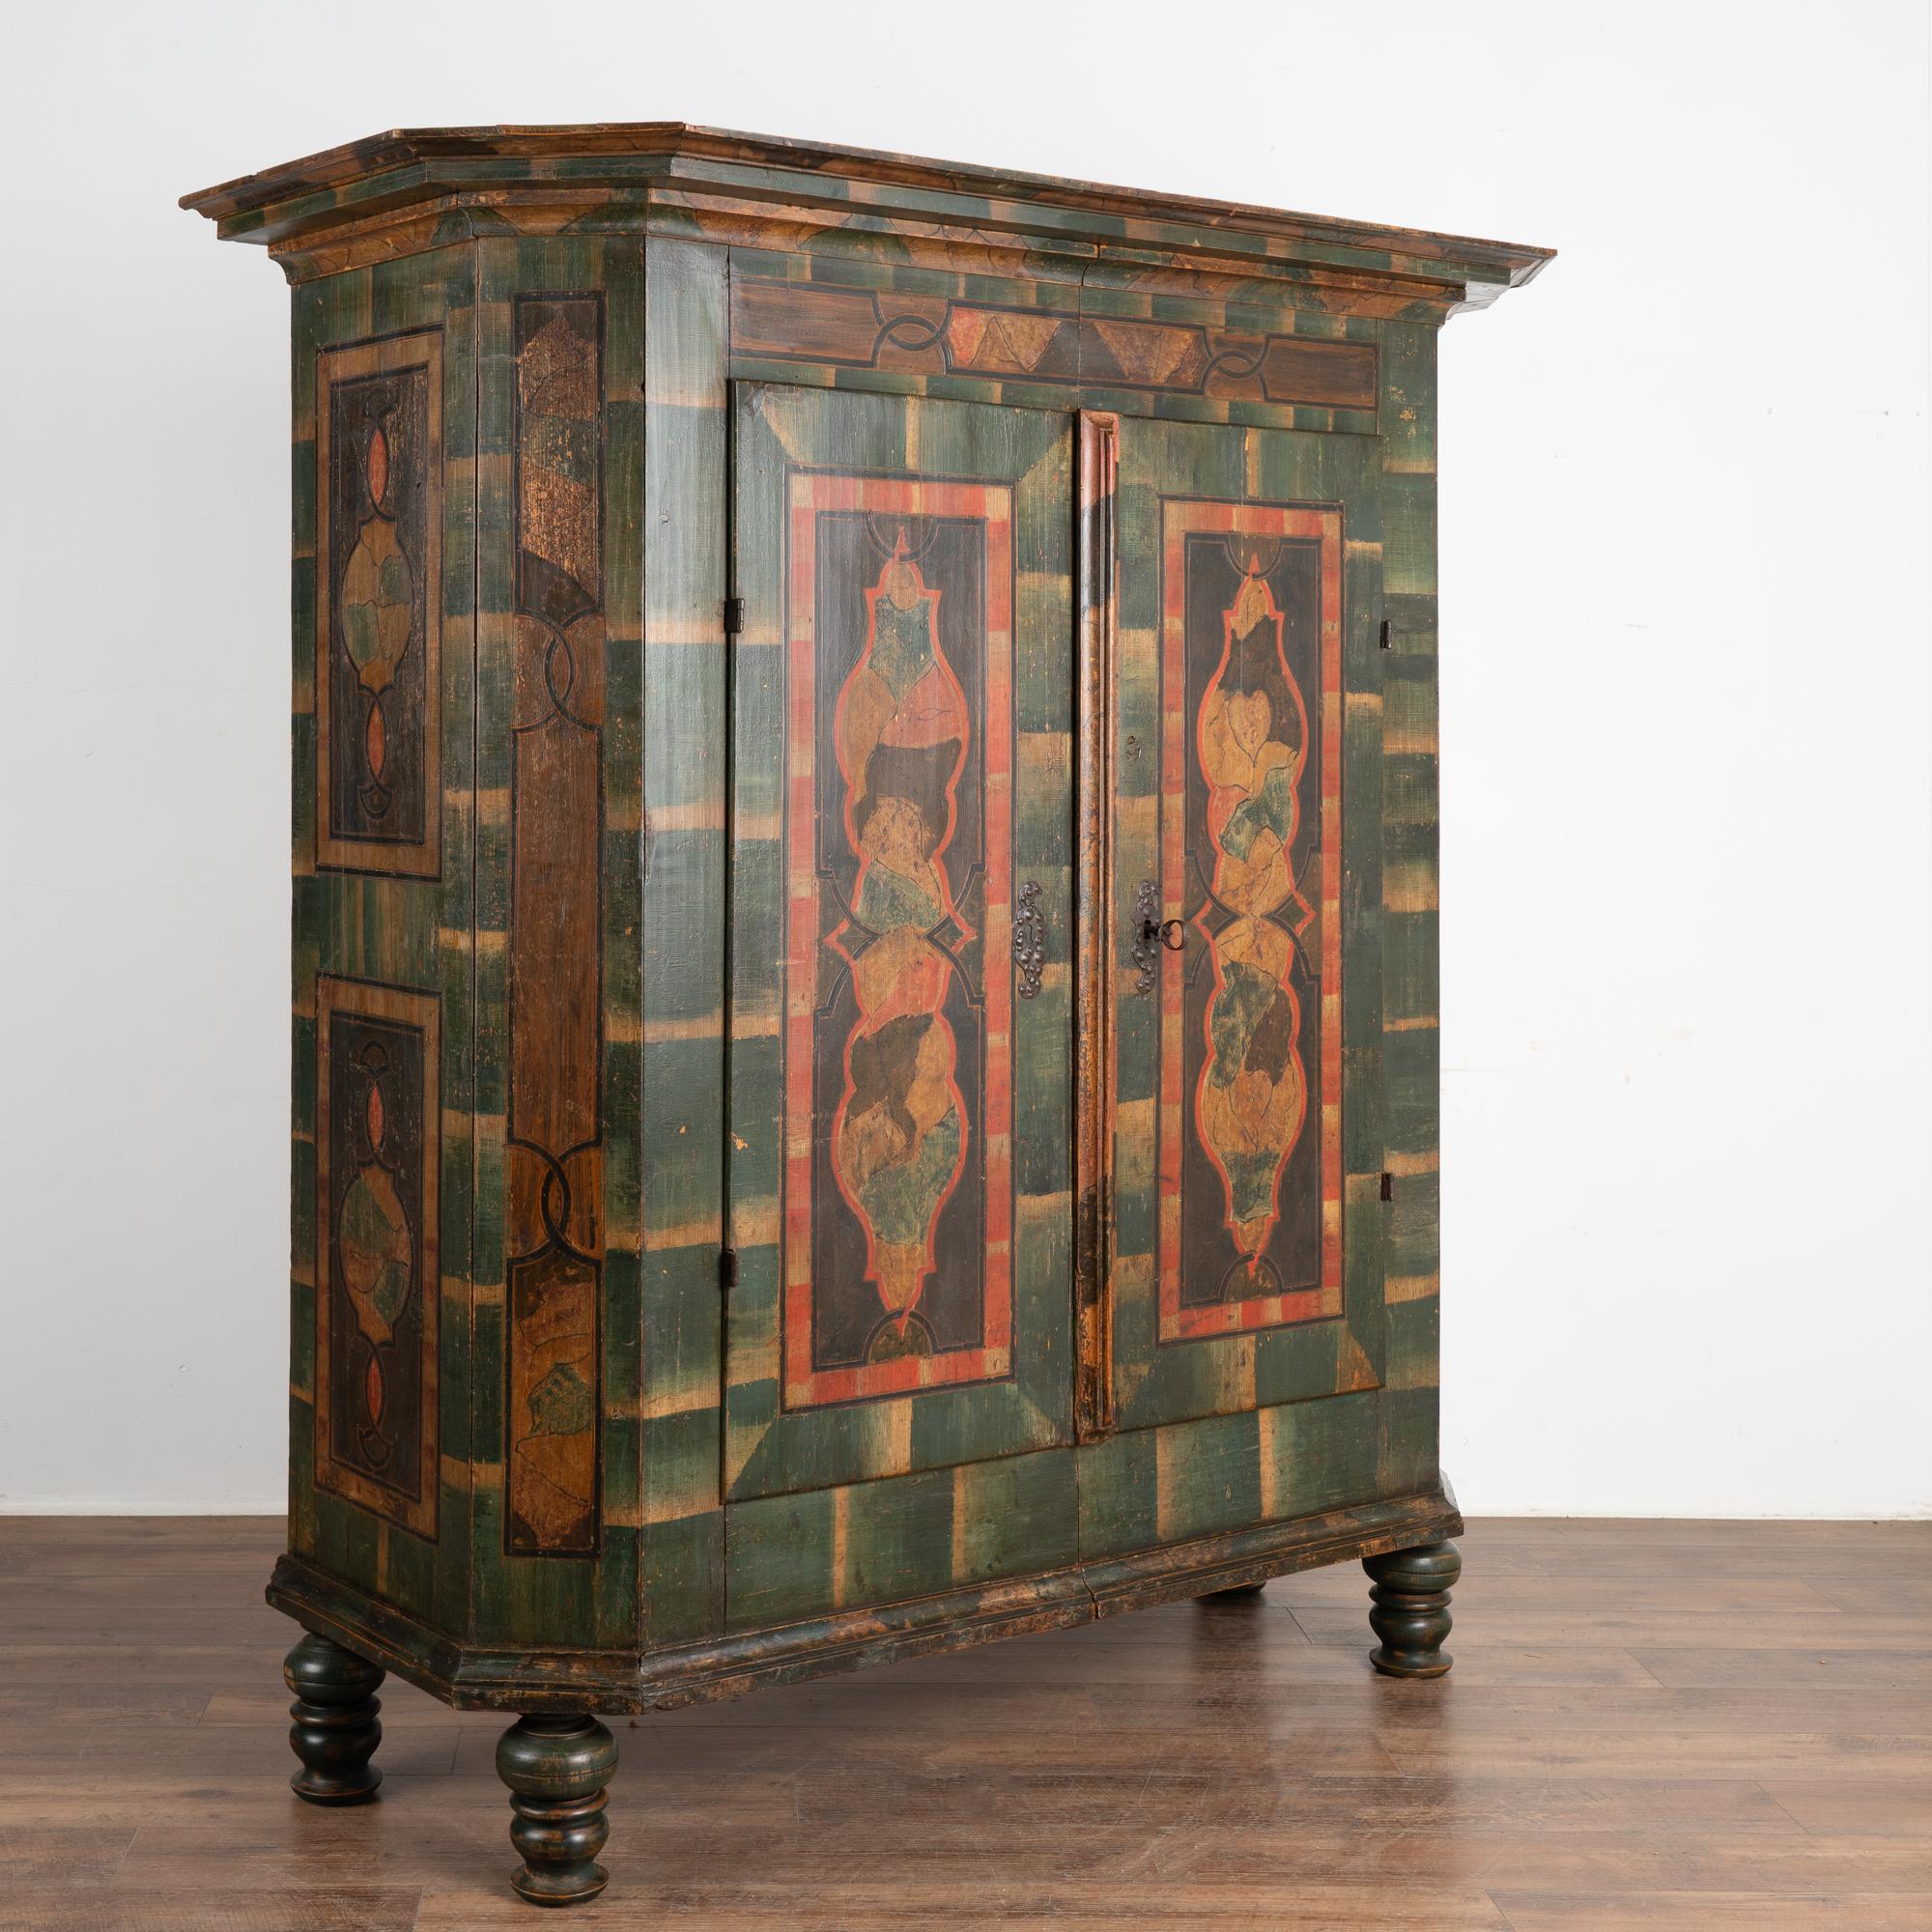 This remarkable painted armoire still maintains the quality and details of the original green hand-painted finish. Please enlarge photos to appreciate the rich colors and unique patterns which are beautifully executed.
Impressive painting continues